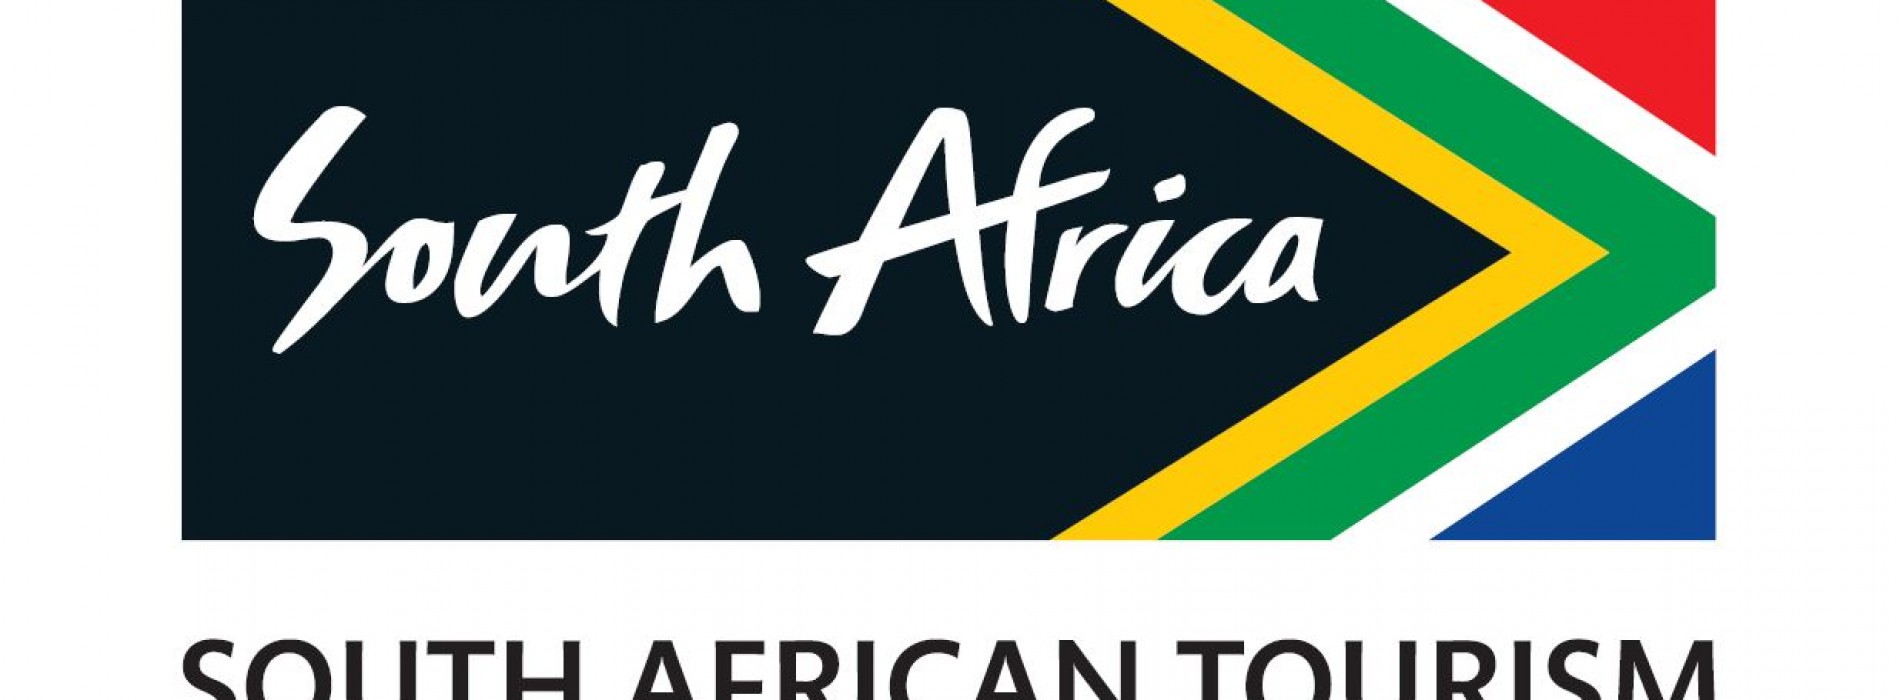 South African Tourism trade delegation arrives in India to define targets and strategy for 2018